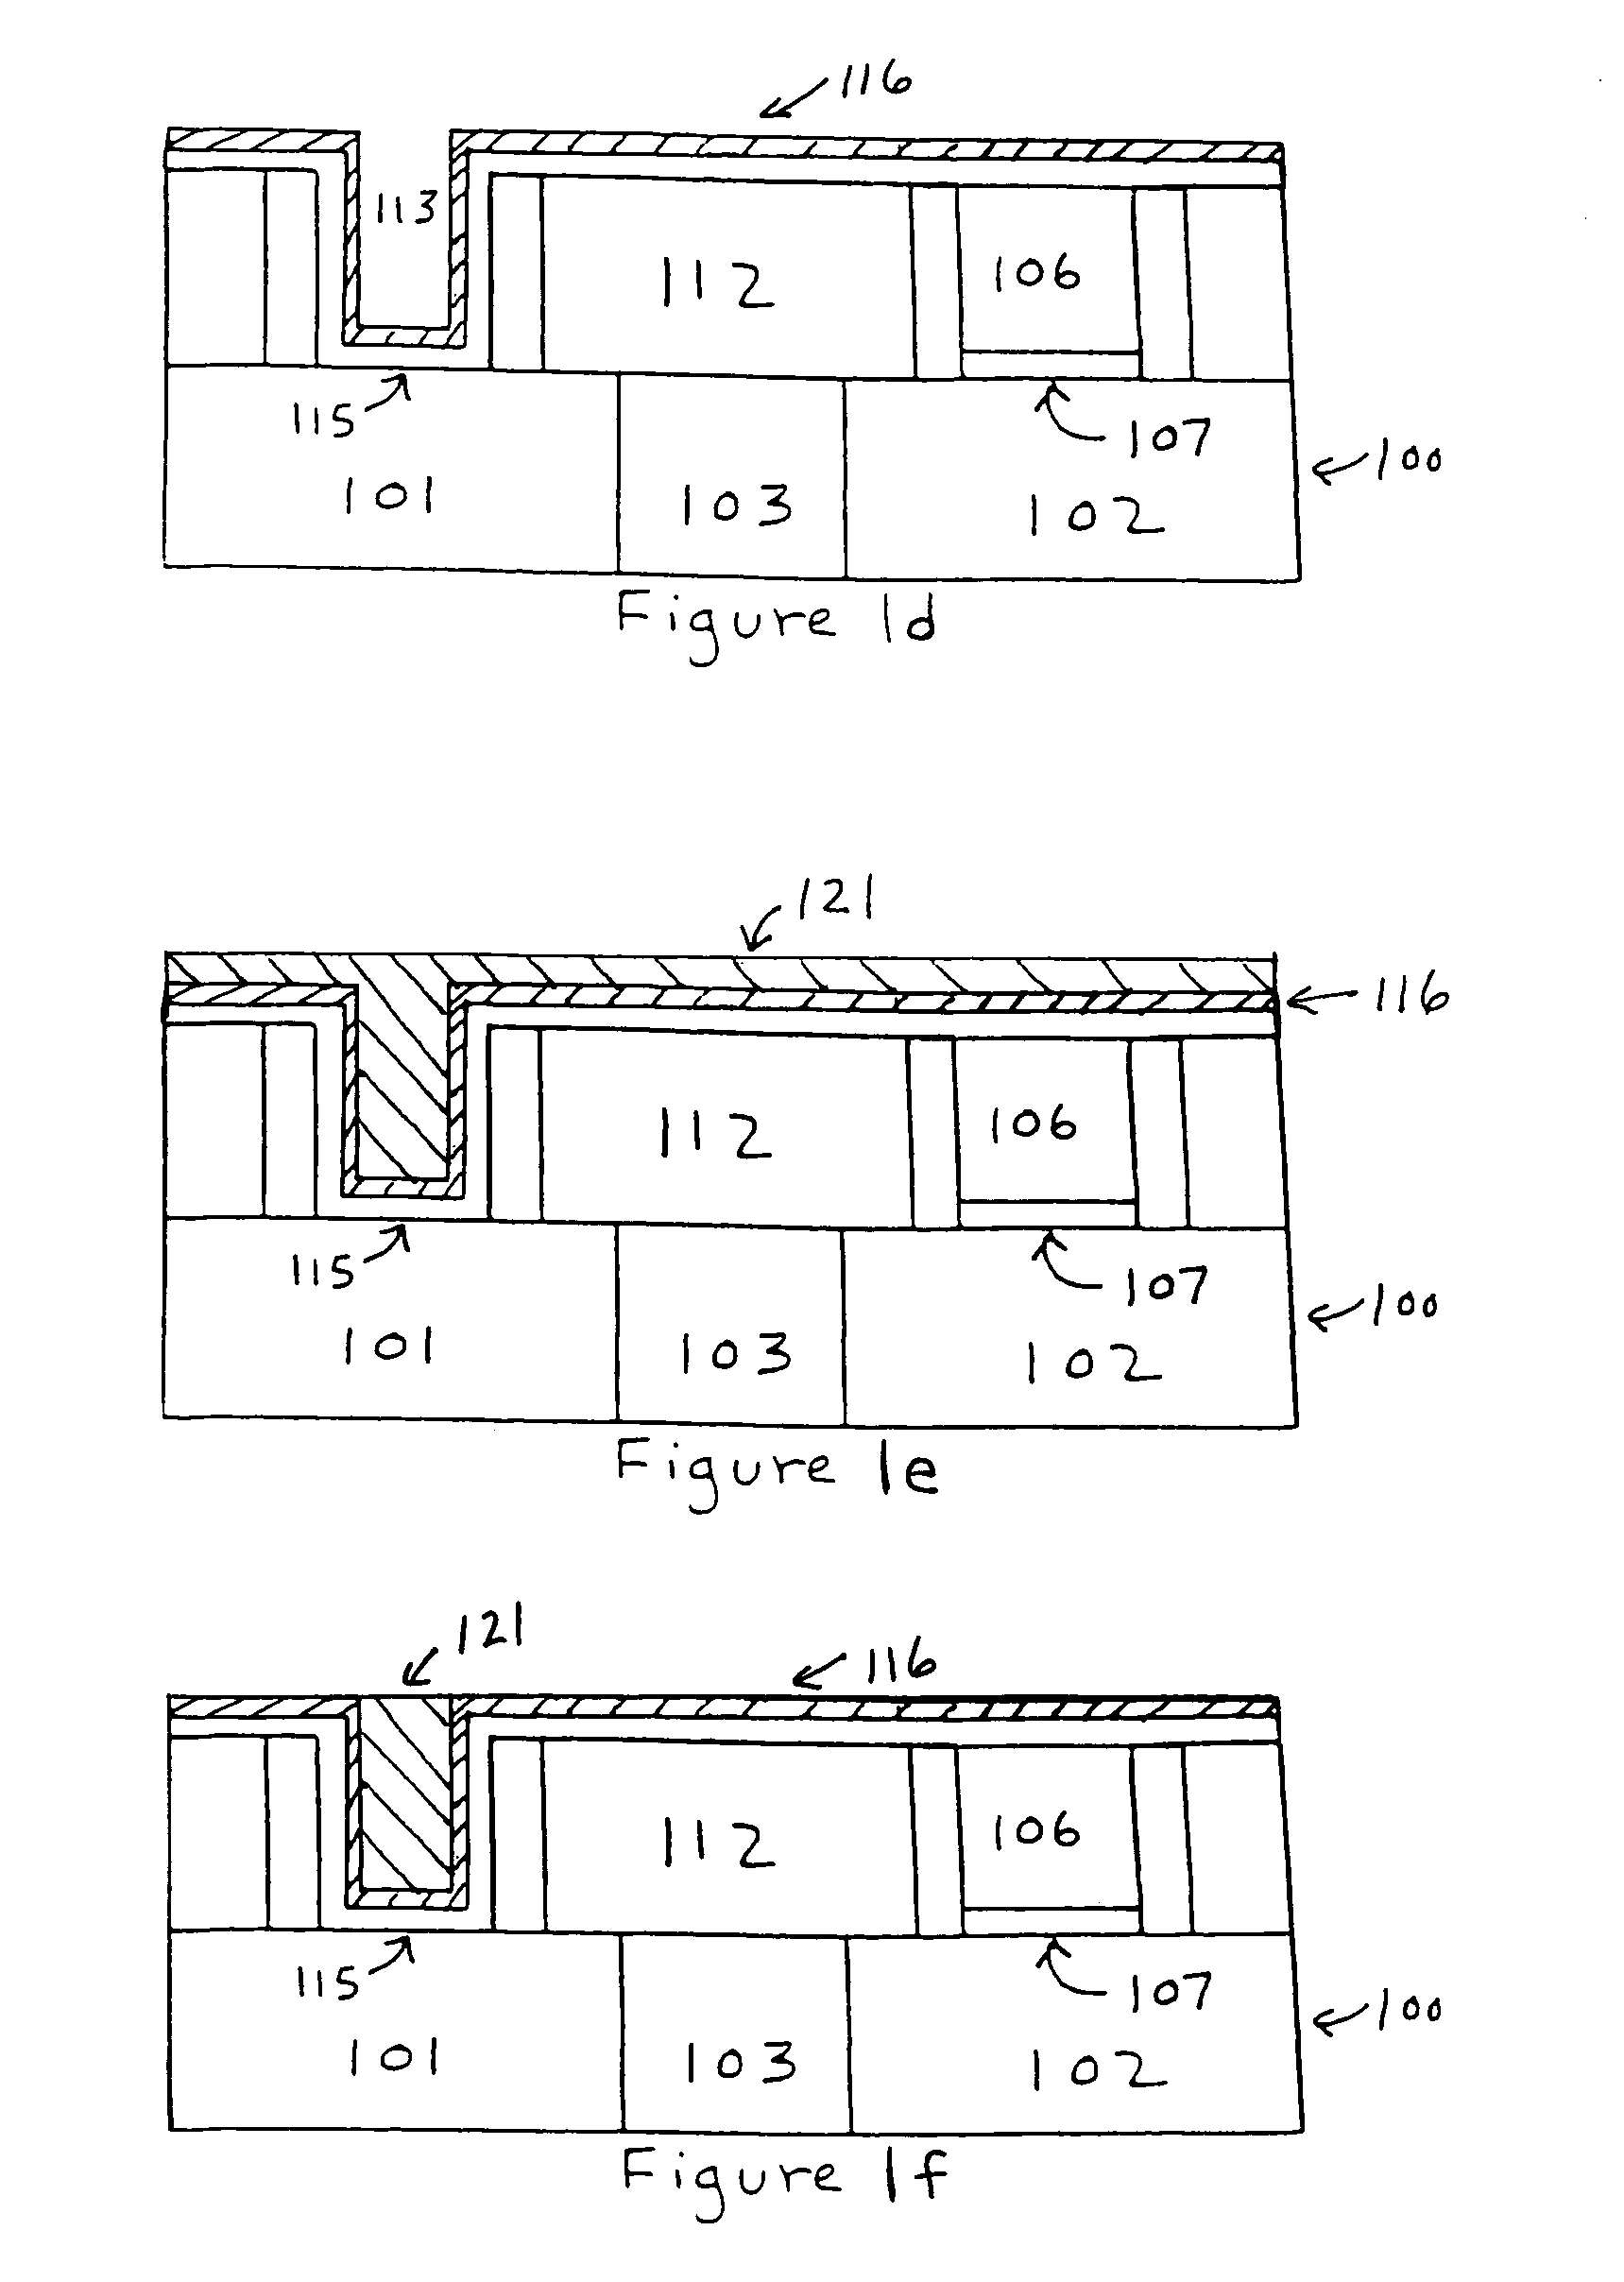 Method for making a semiconductor device having a high-k gate dielectric layer and a metal gate electrode